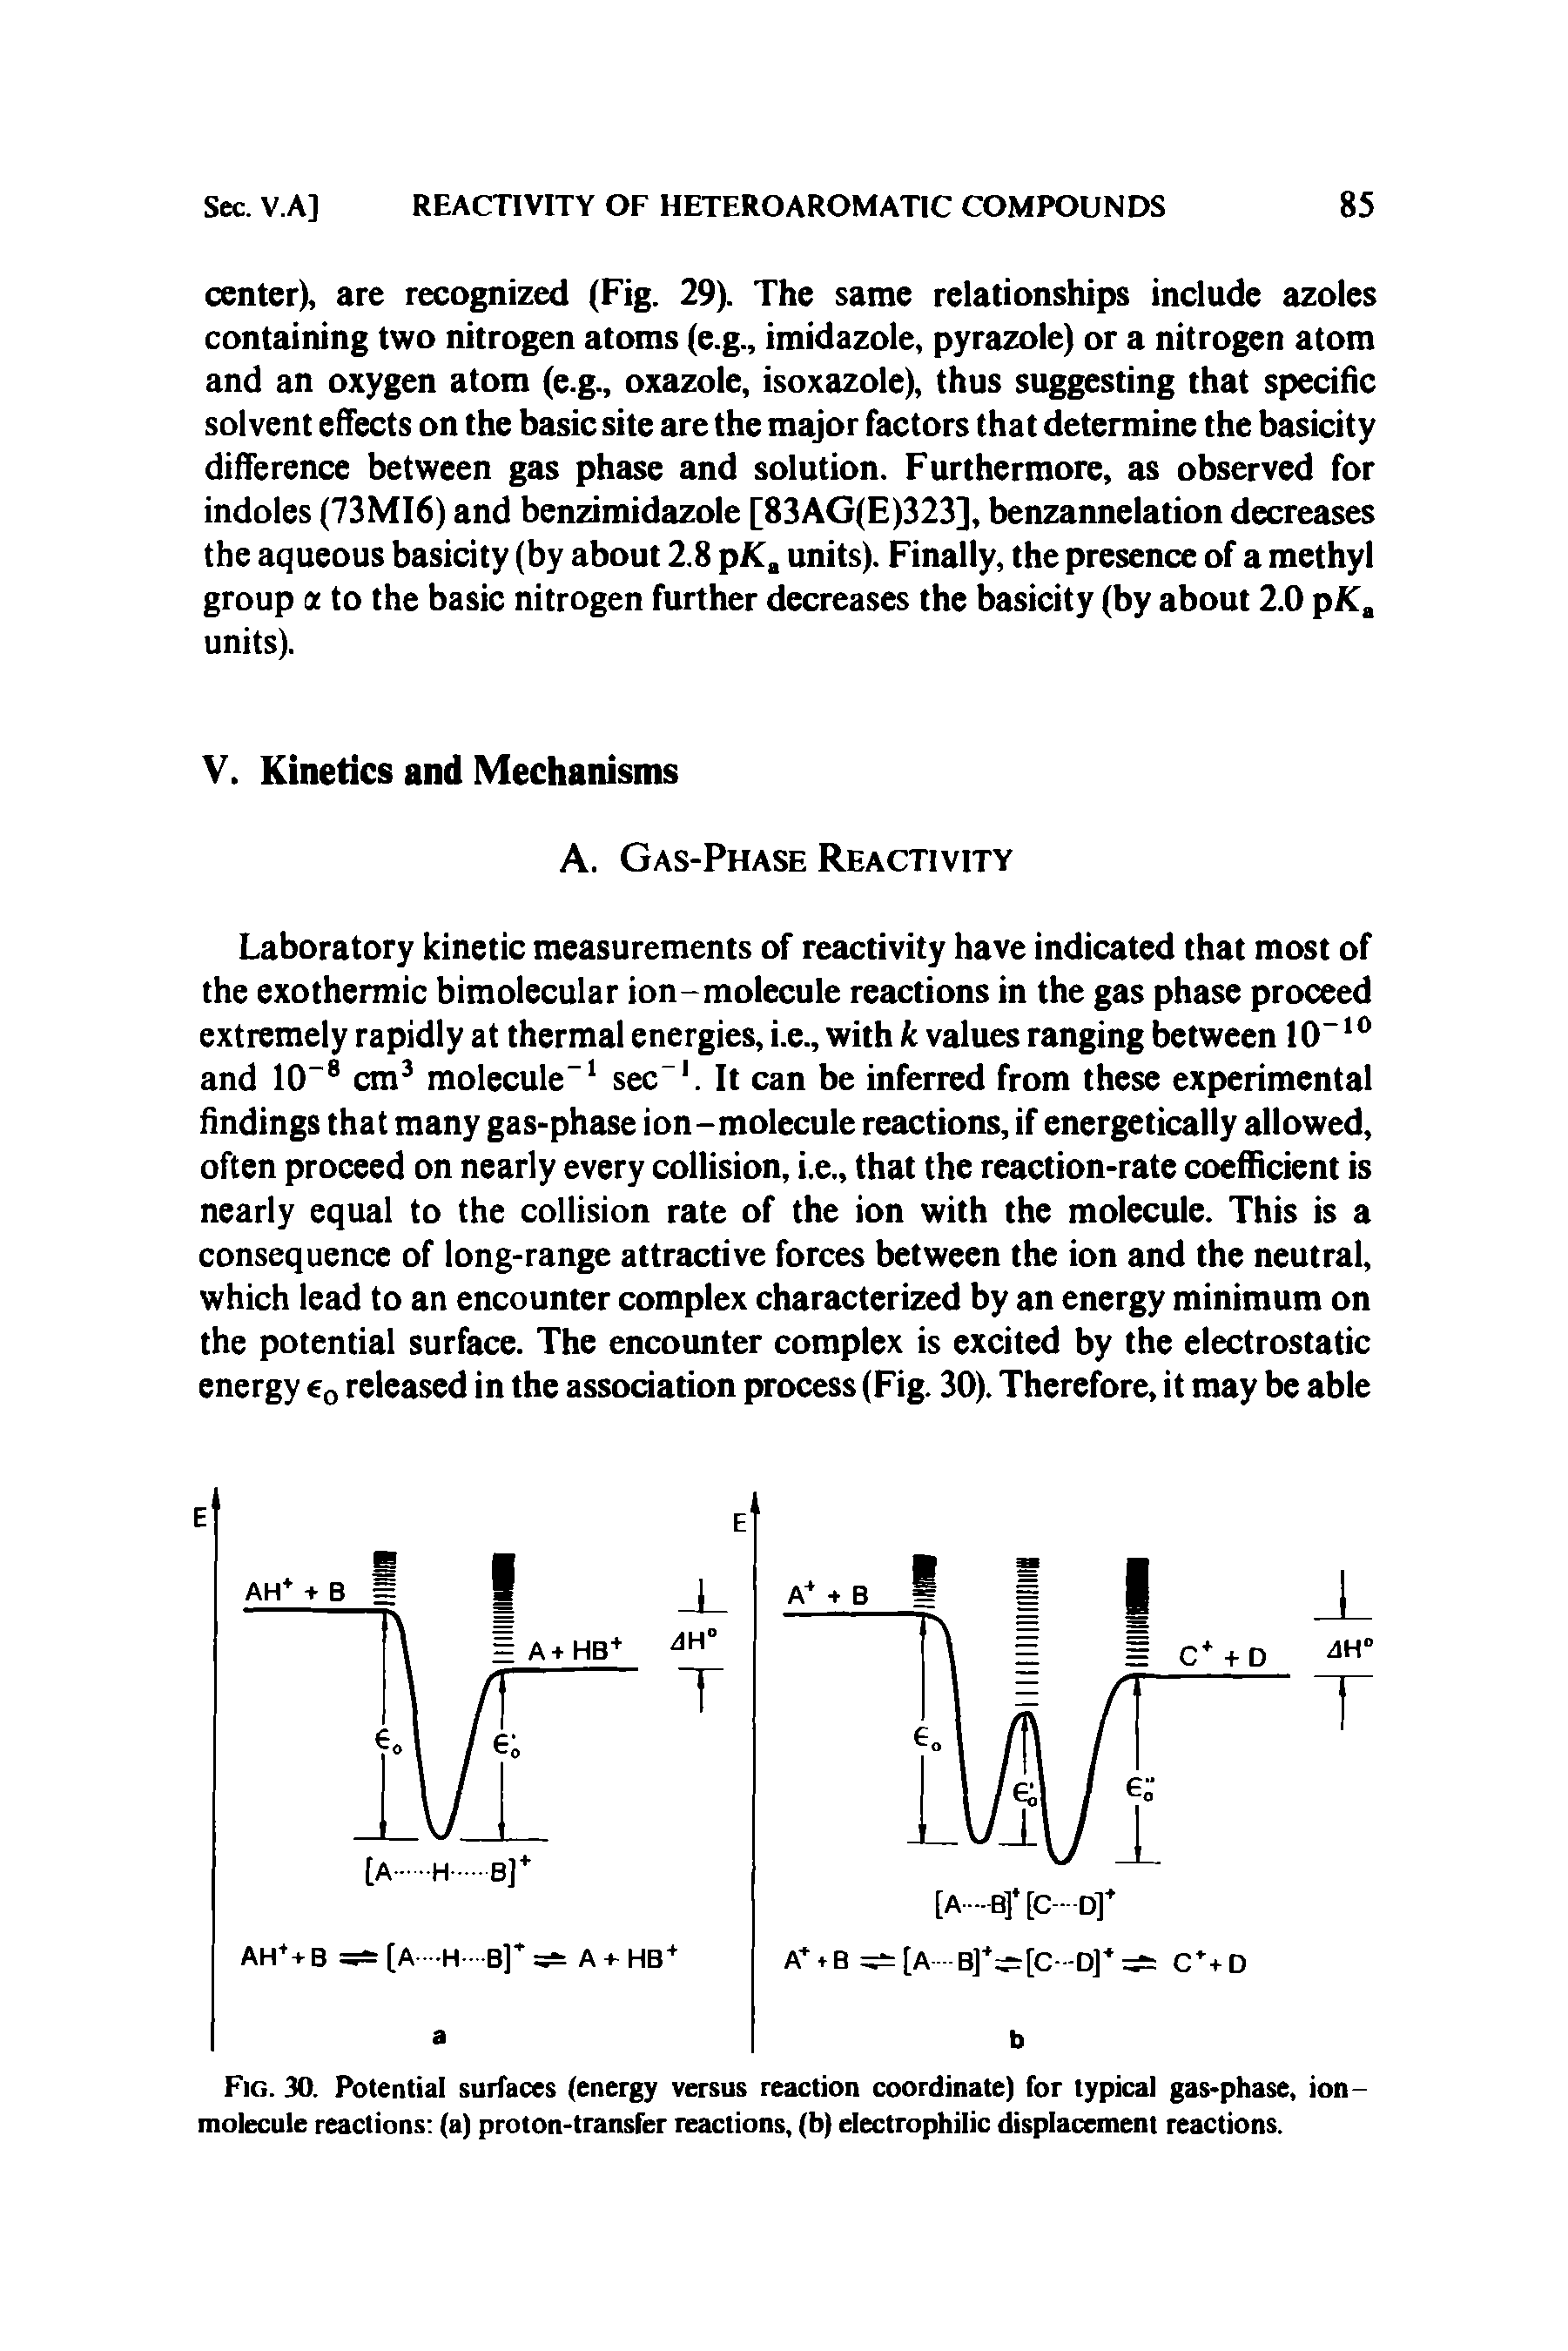 Fig. 30. Potential surfaces (energy versus reaction coordinate) for typical gas-phase, ion-molecule reactions (a) proton-transfer reactions, (b) electrophilic displacement reactions.